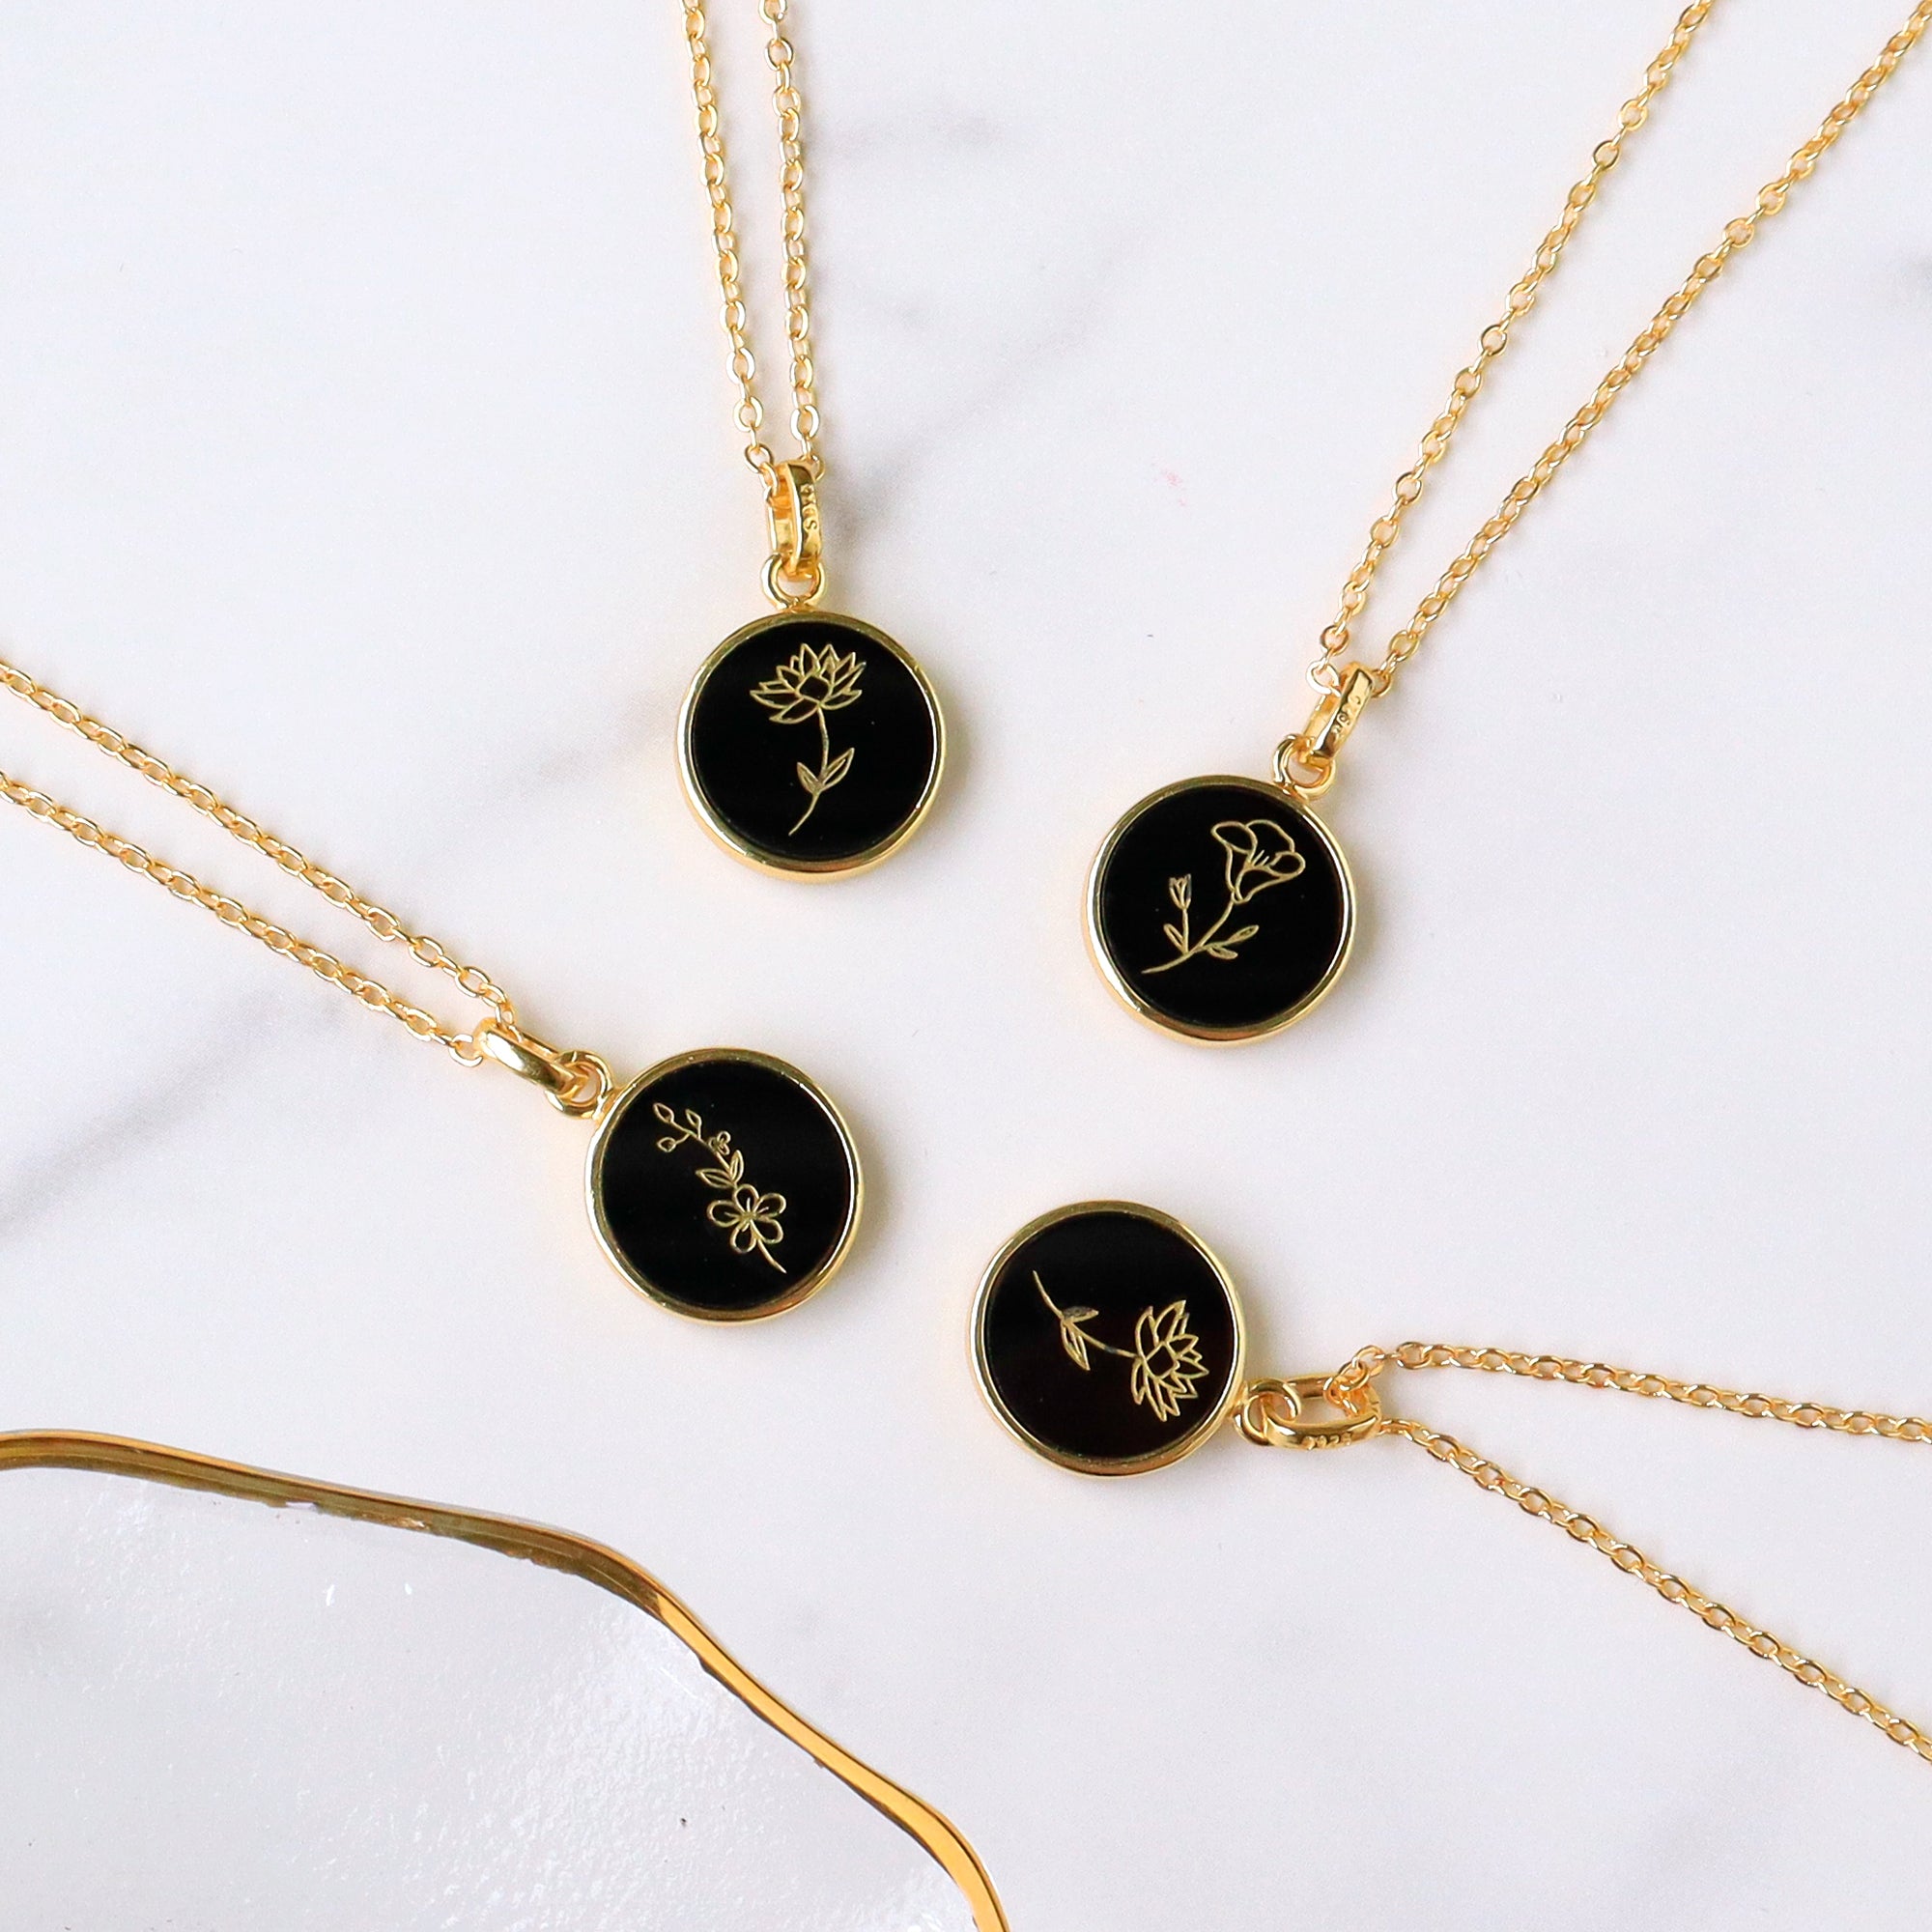 16" Gold Plated Round Black Obsidian Necklace, Carved Moonstone Flower Necklace, Healing Gemstone Jewelry KZ031